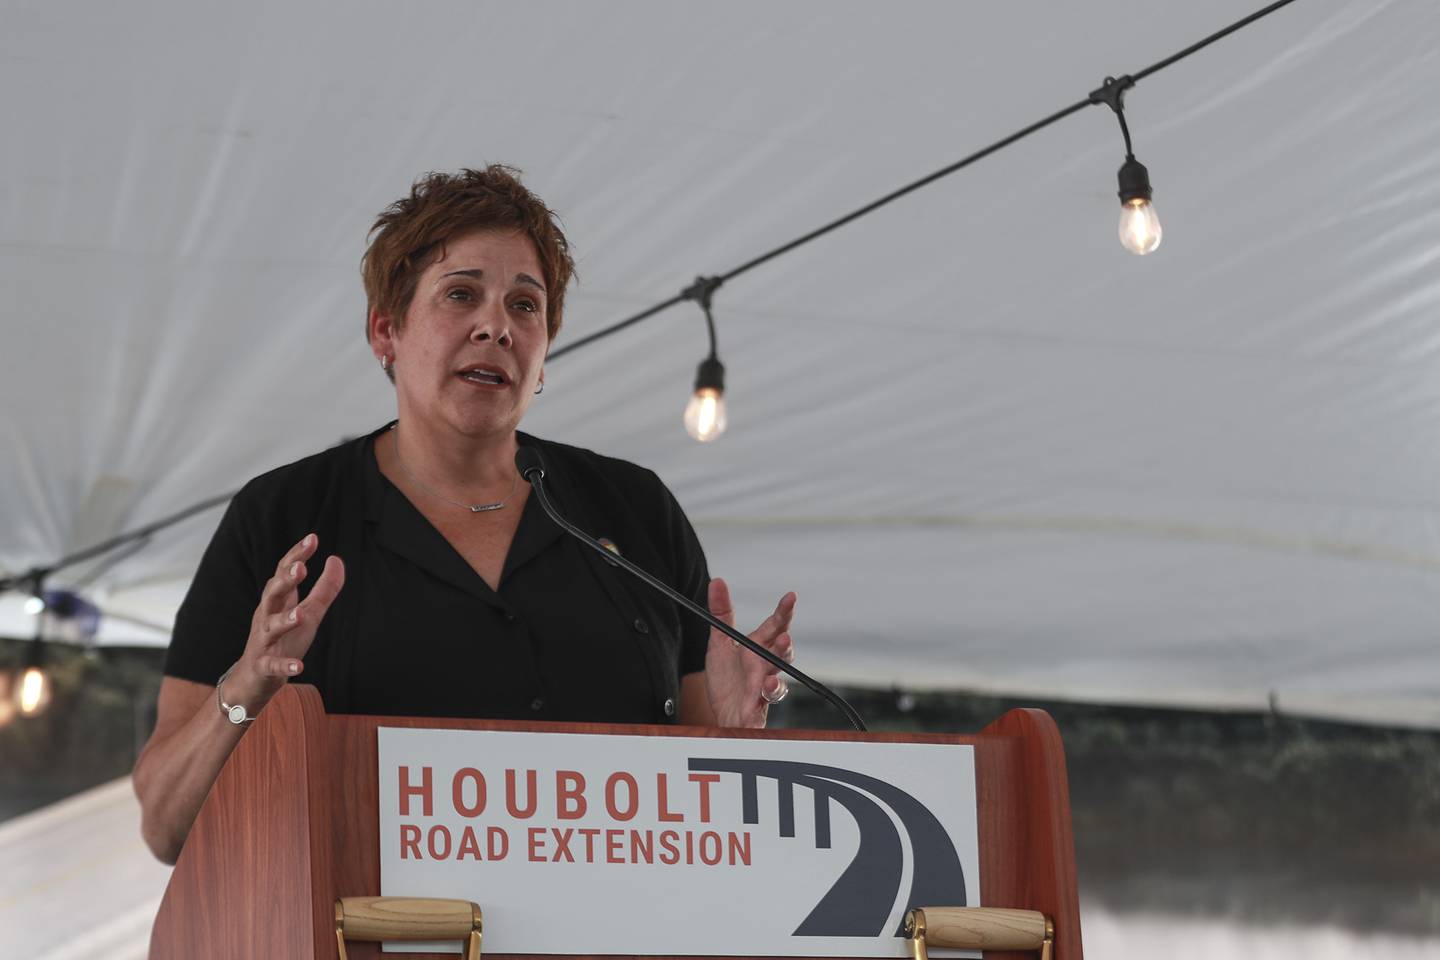 Will County Executive Jennifer Bertino-Tarrant speaks at the Houbolt bridge ground breaking ceremony on Tuesday, July 20, 2021, at 3000 block of Channahon Rd. in Joliet, Ill. A groundbreaking ceremony was held to celebrate the Houbolt Rd. bridge being built over the Des Plaines River.